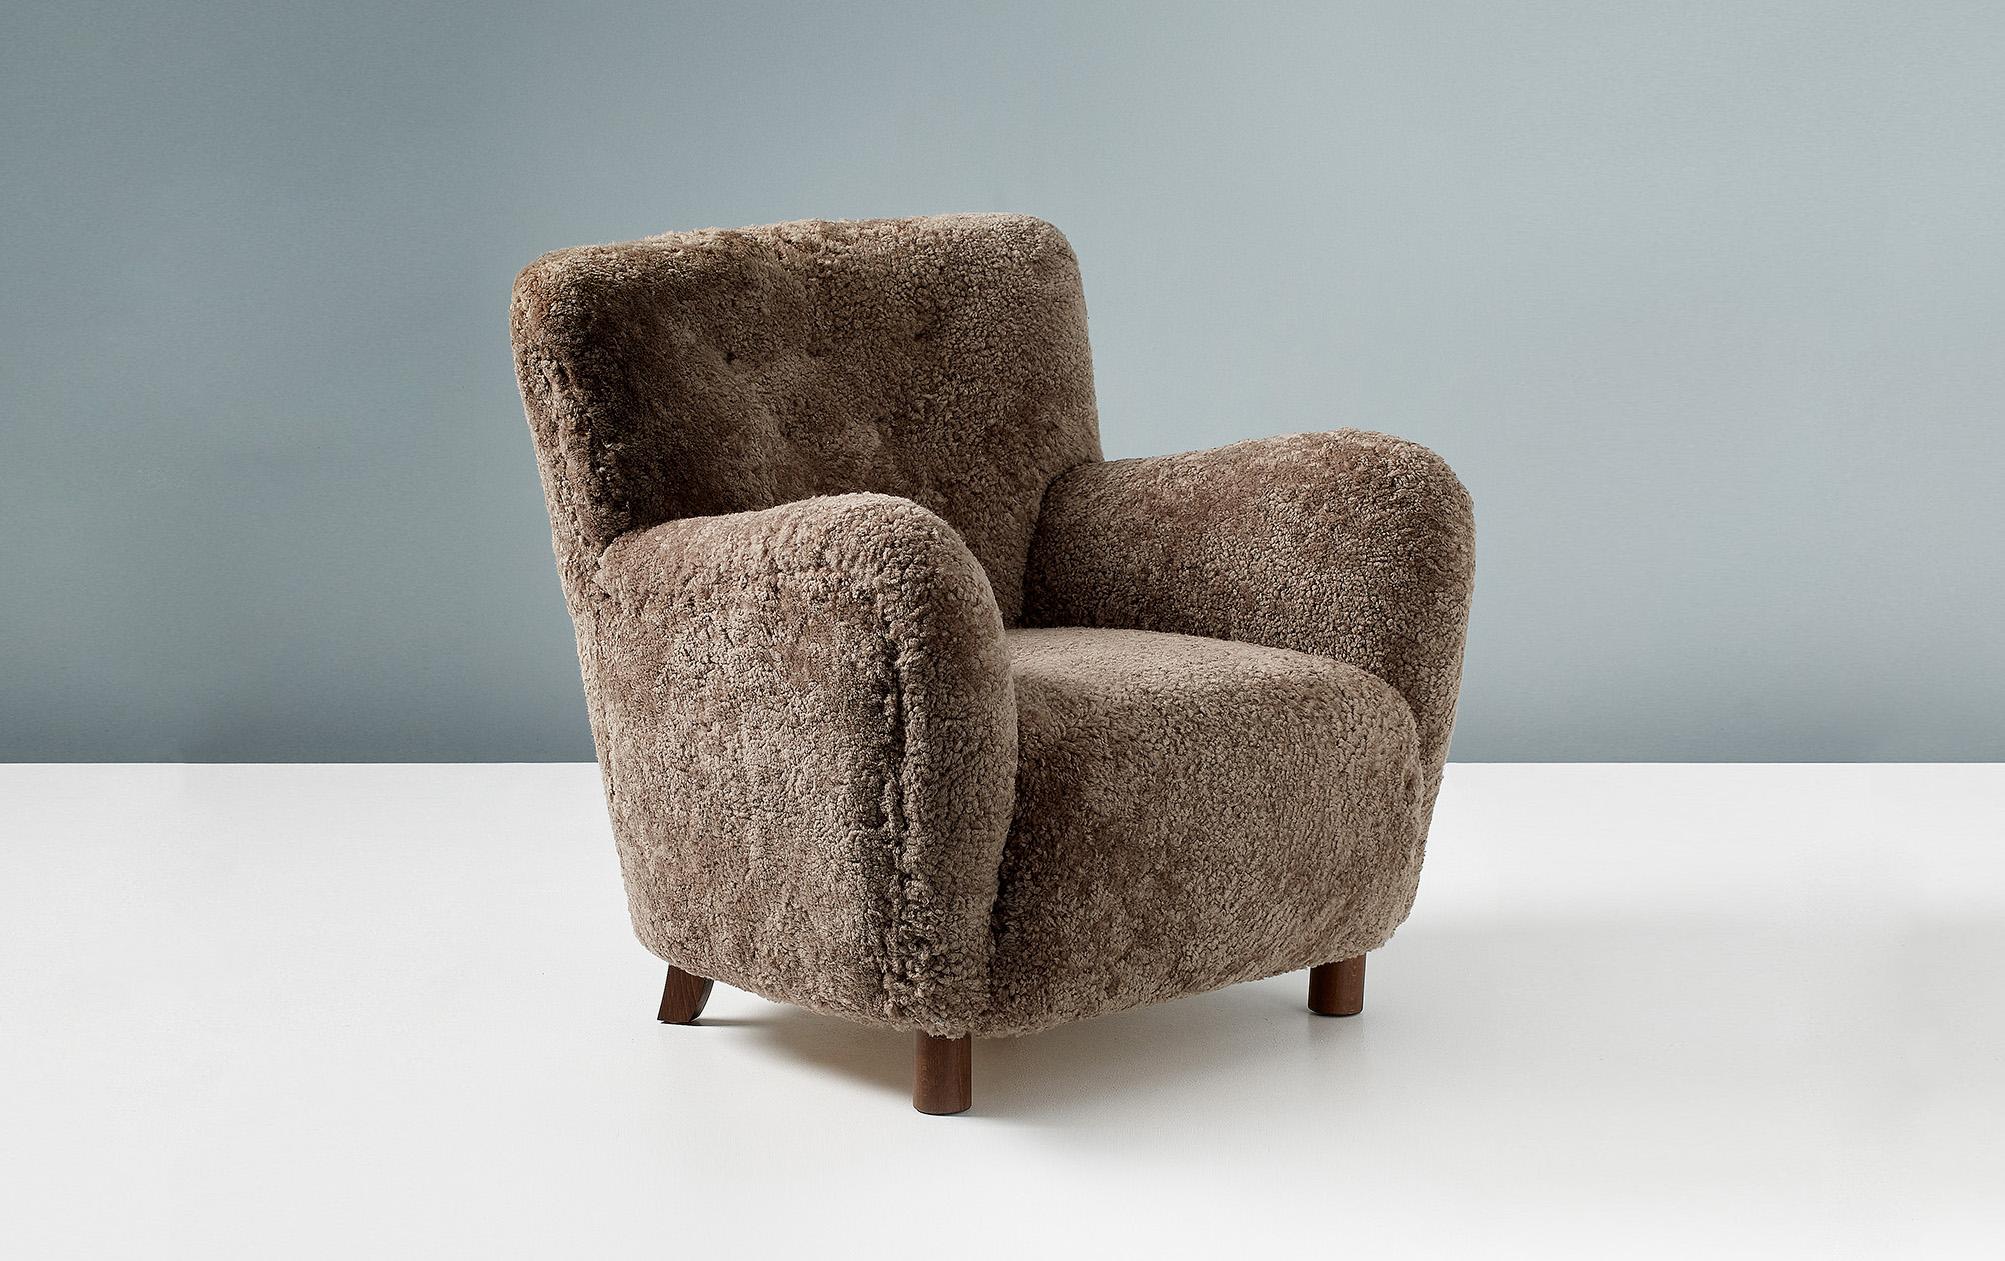 Dagmar Design Model 54 lounge chair

A custom made lounge chair developed and hand-made at our workshops in London using the highest quality materials. The 54 chair is available to order in a range of different shearling colors and fabrics with a